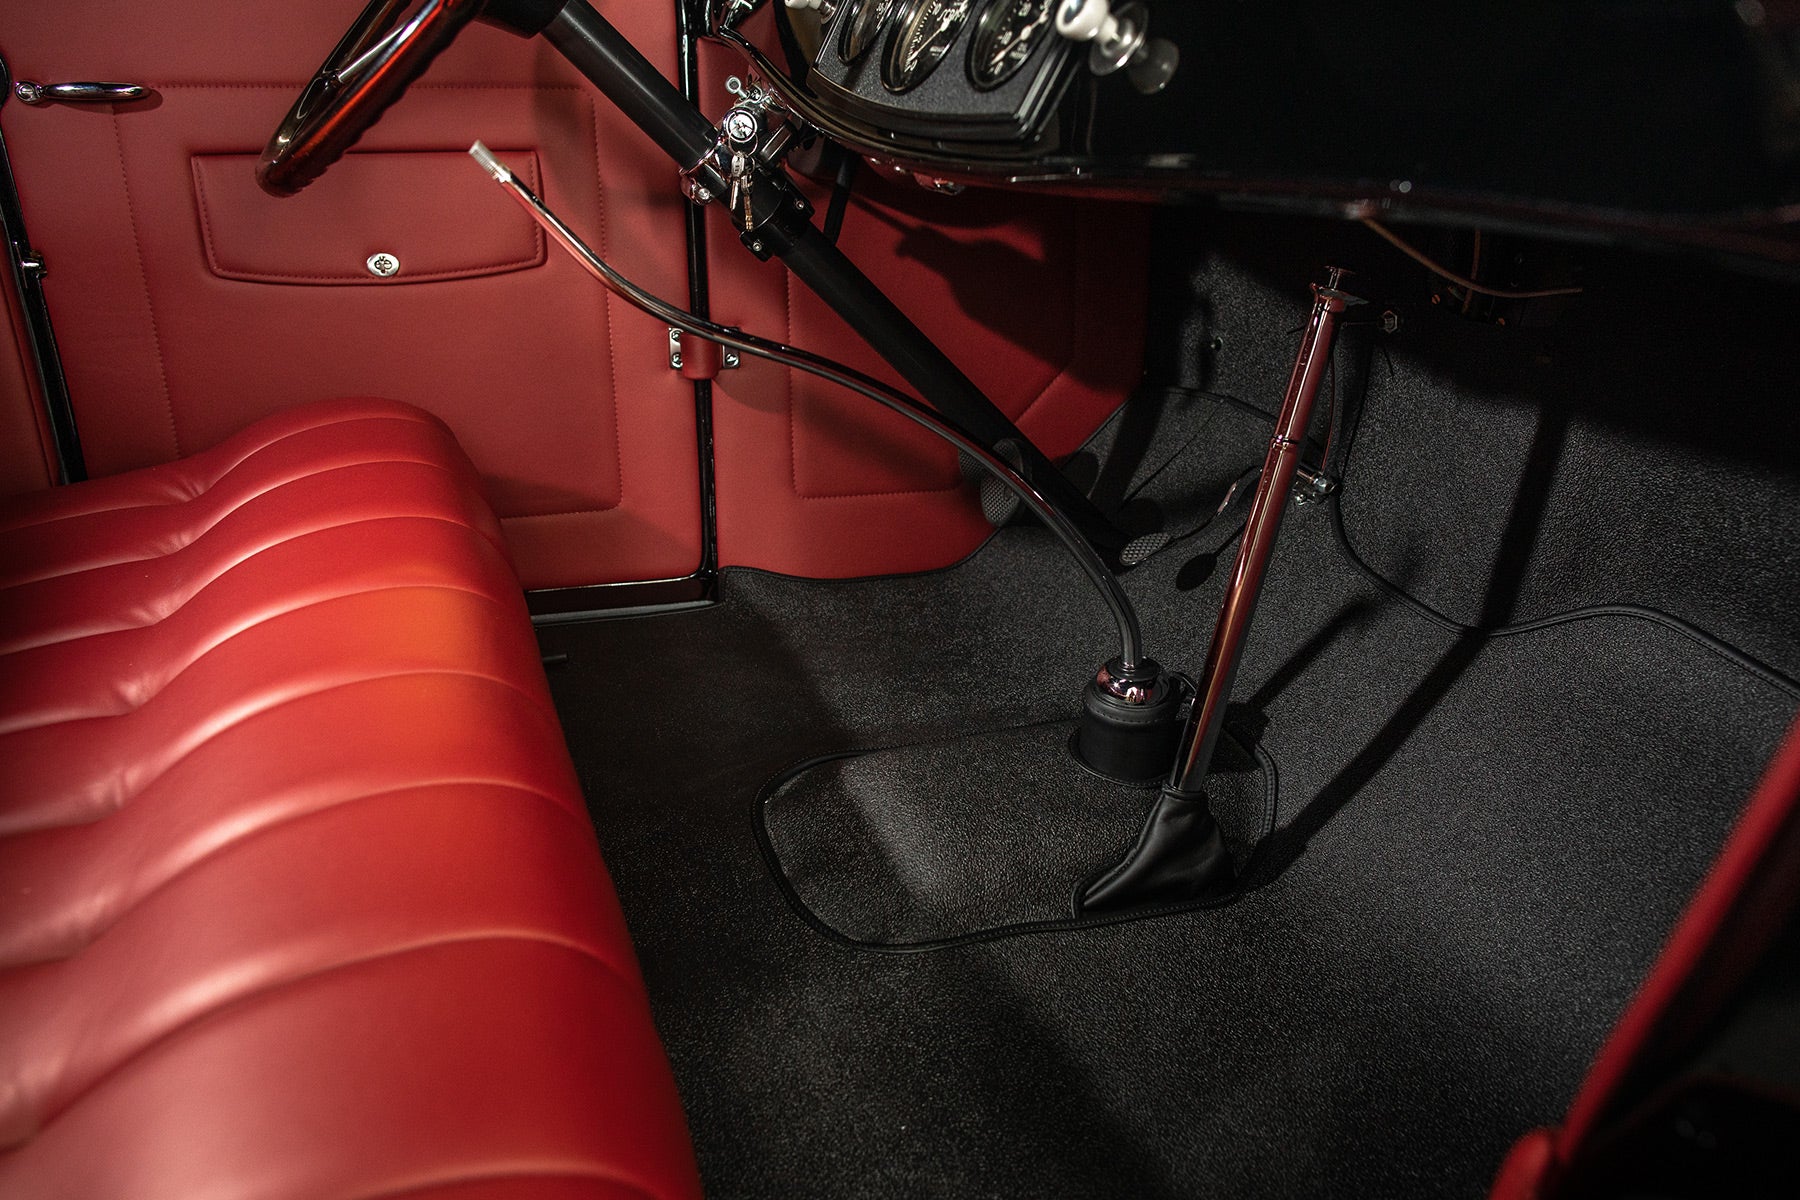 Relicate Napali leather 1932 Ford Roadster Red interior carpet